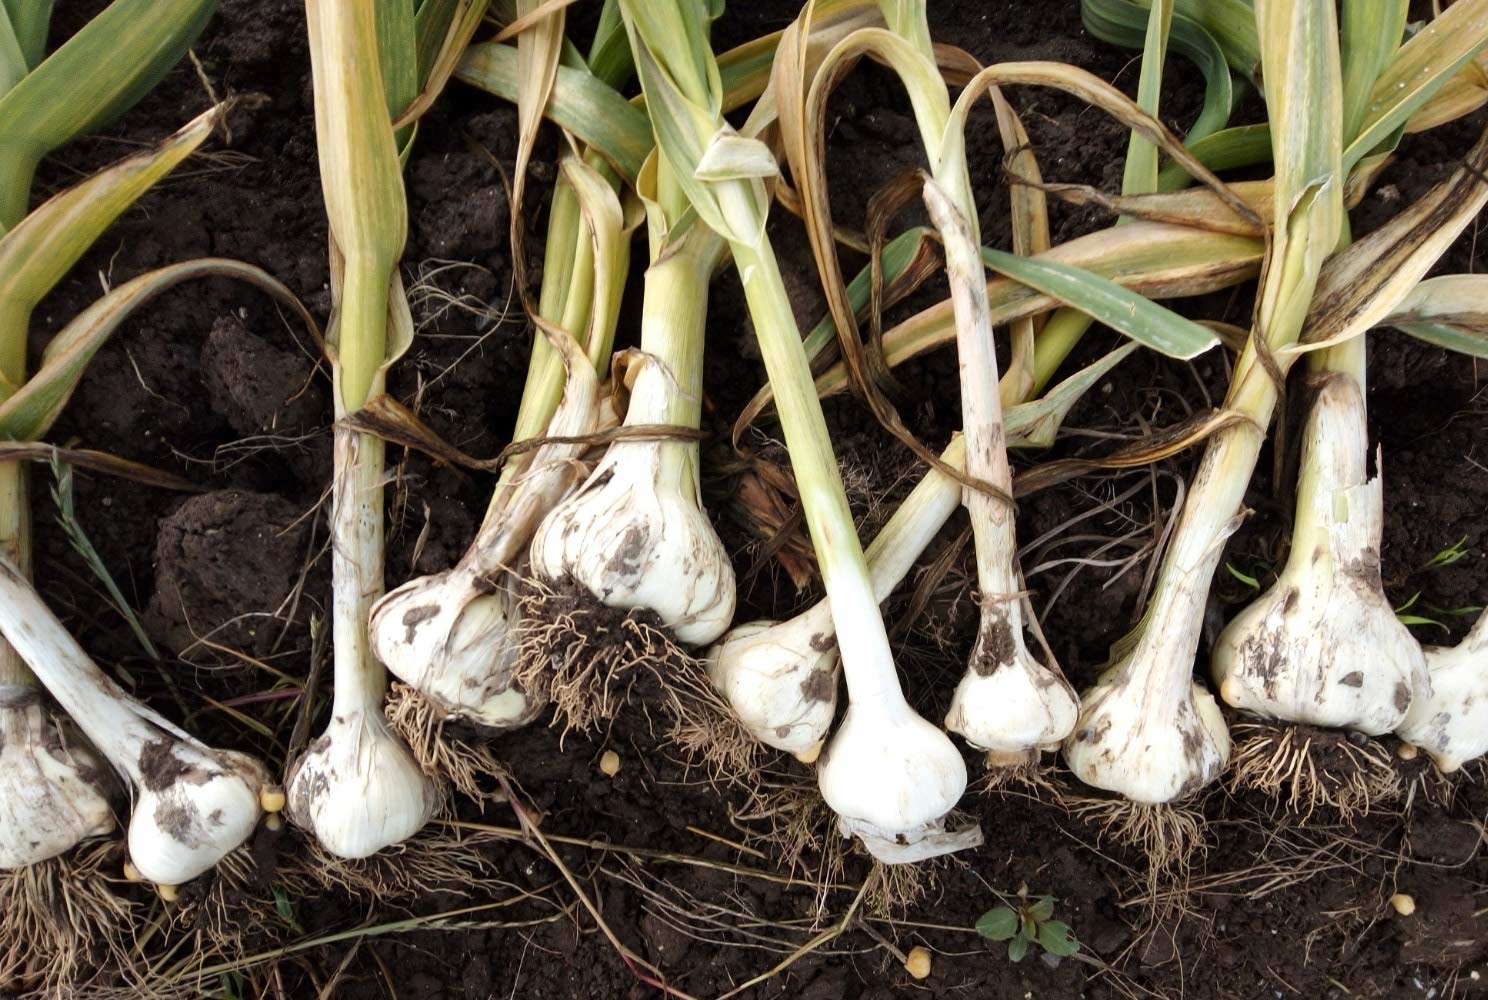 Organic Elephant Garlic immediately after being harvested from the ground